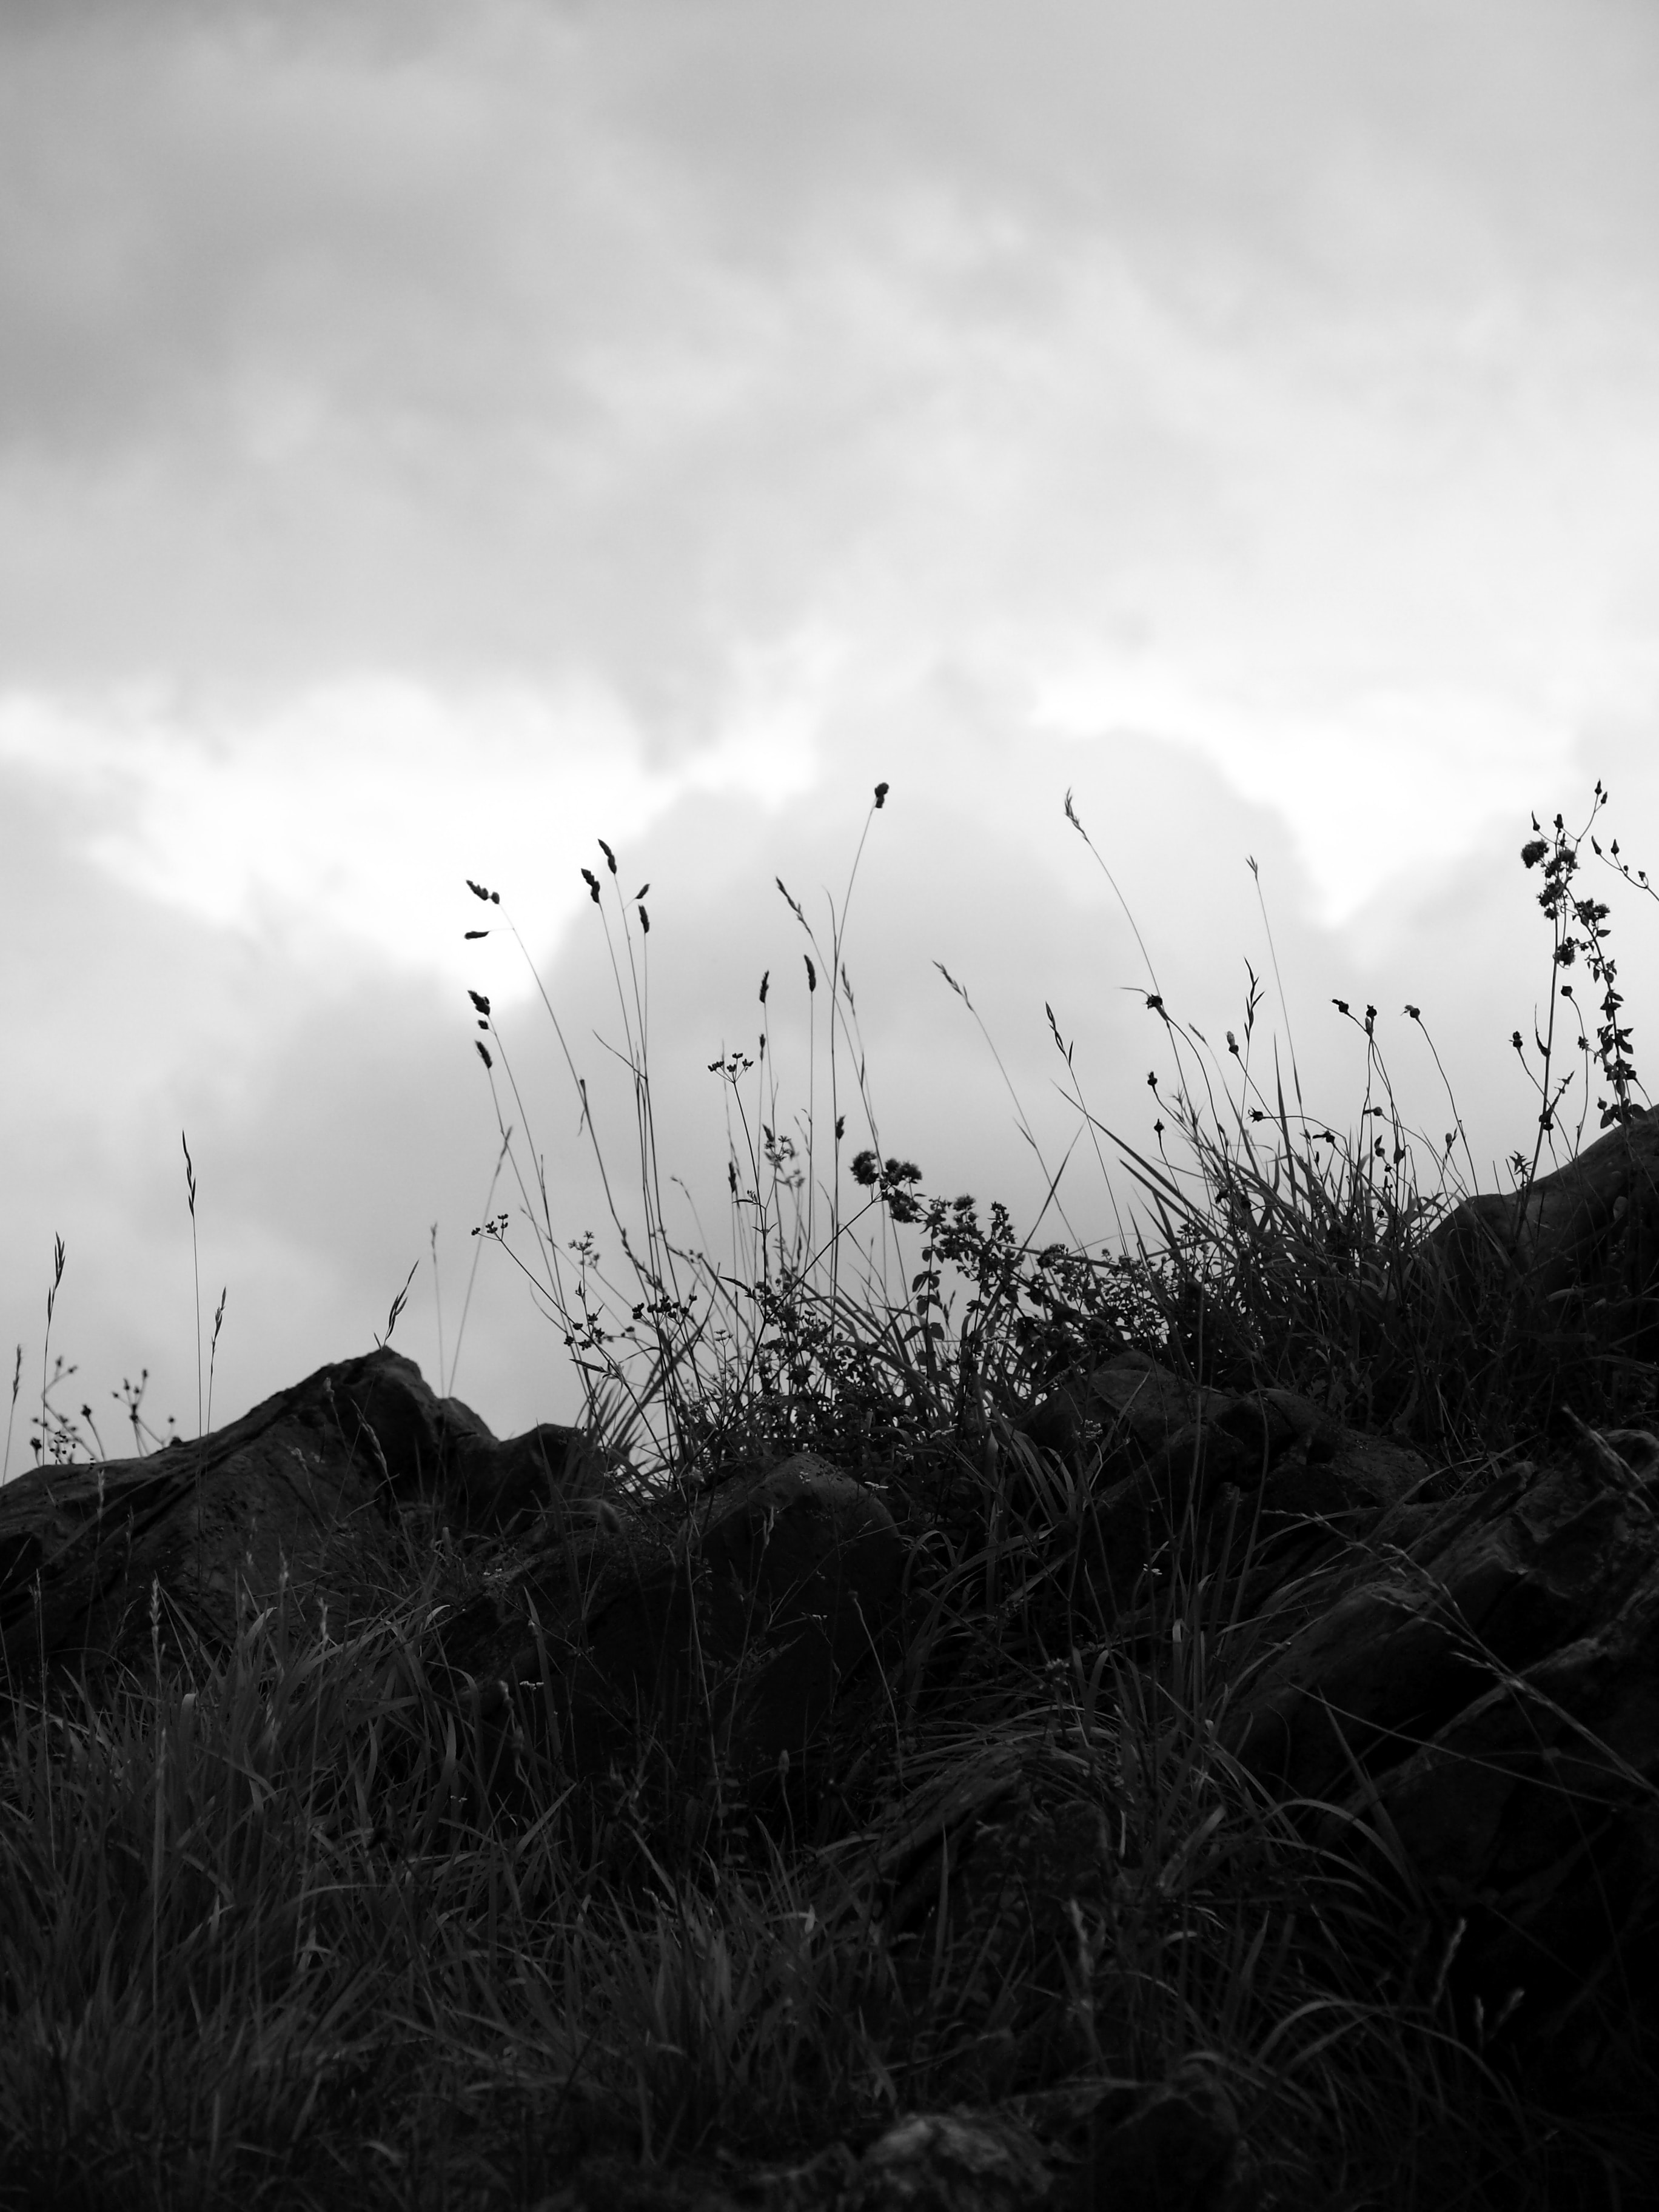 clouds, chb, nature, grass, stones, sky, bw, hill 1080p